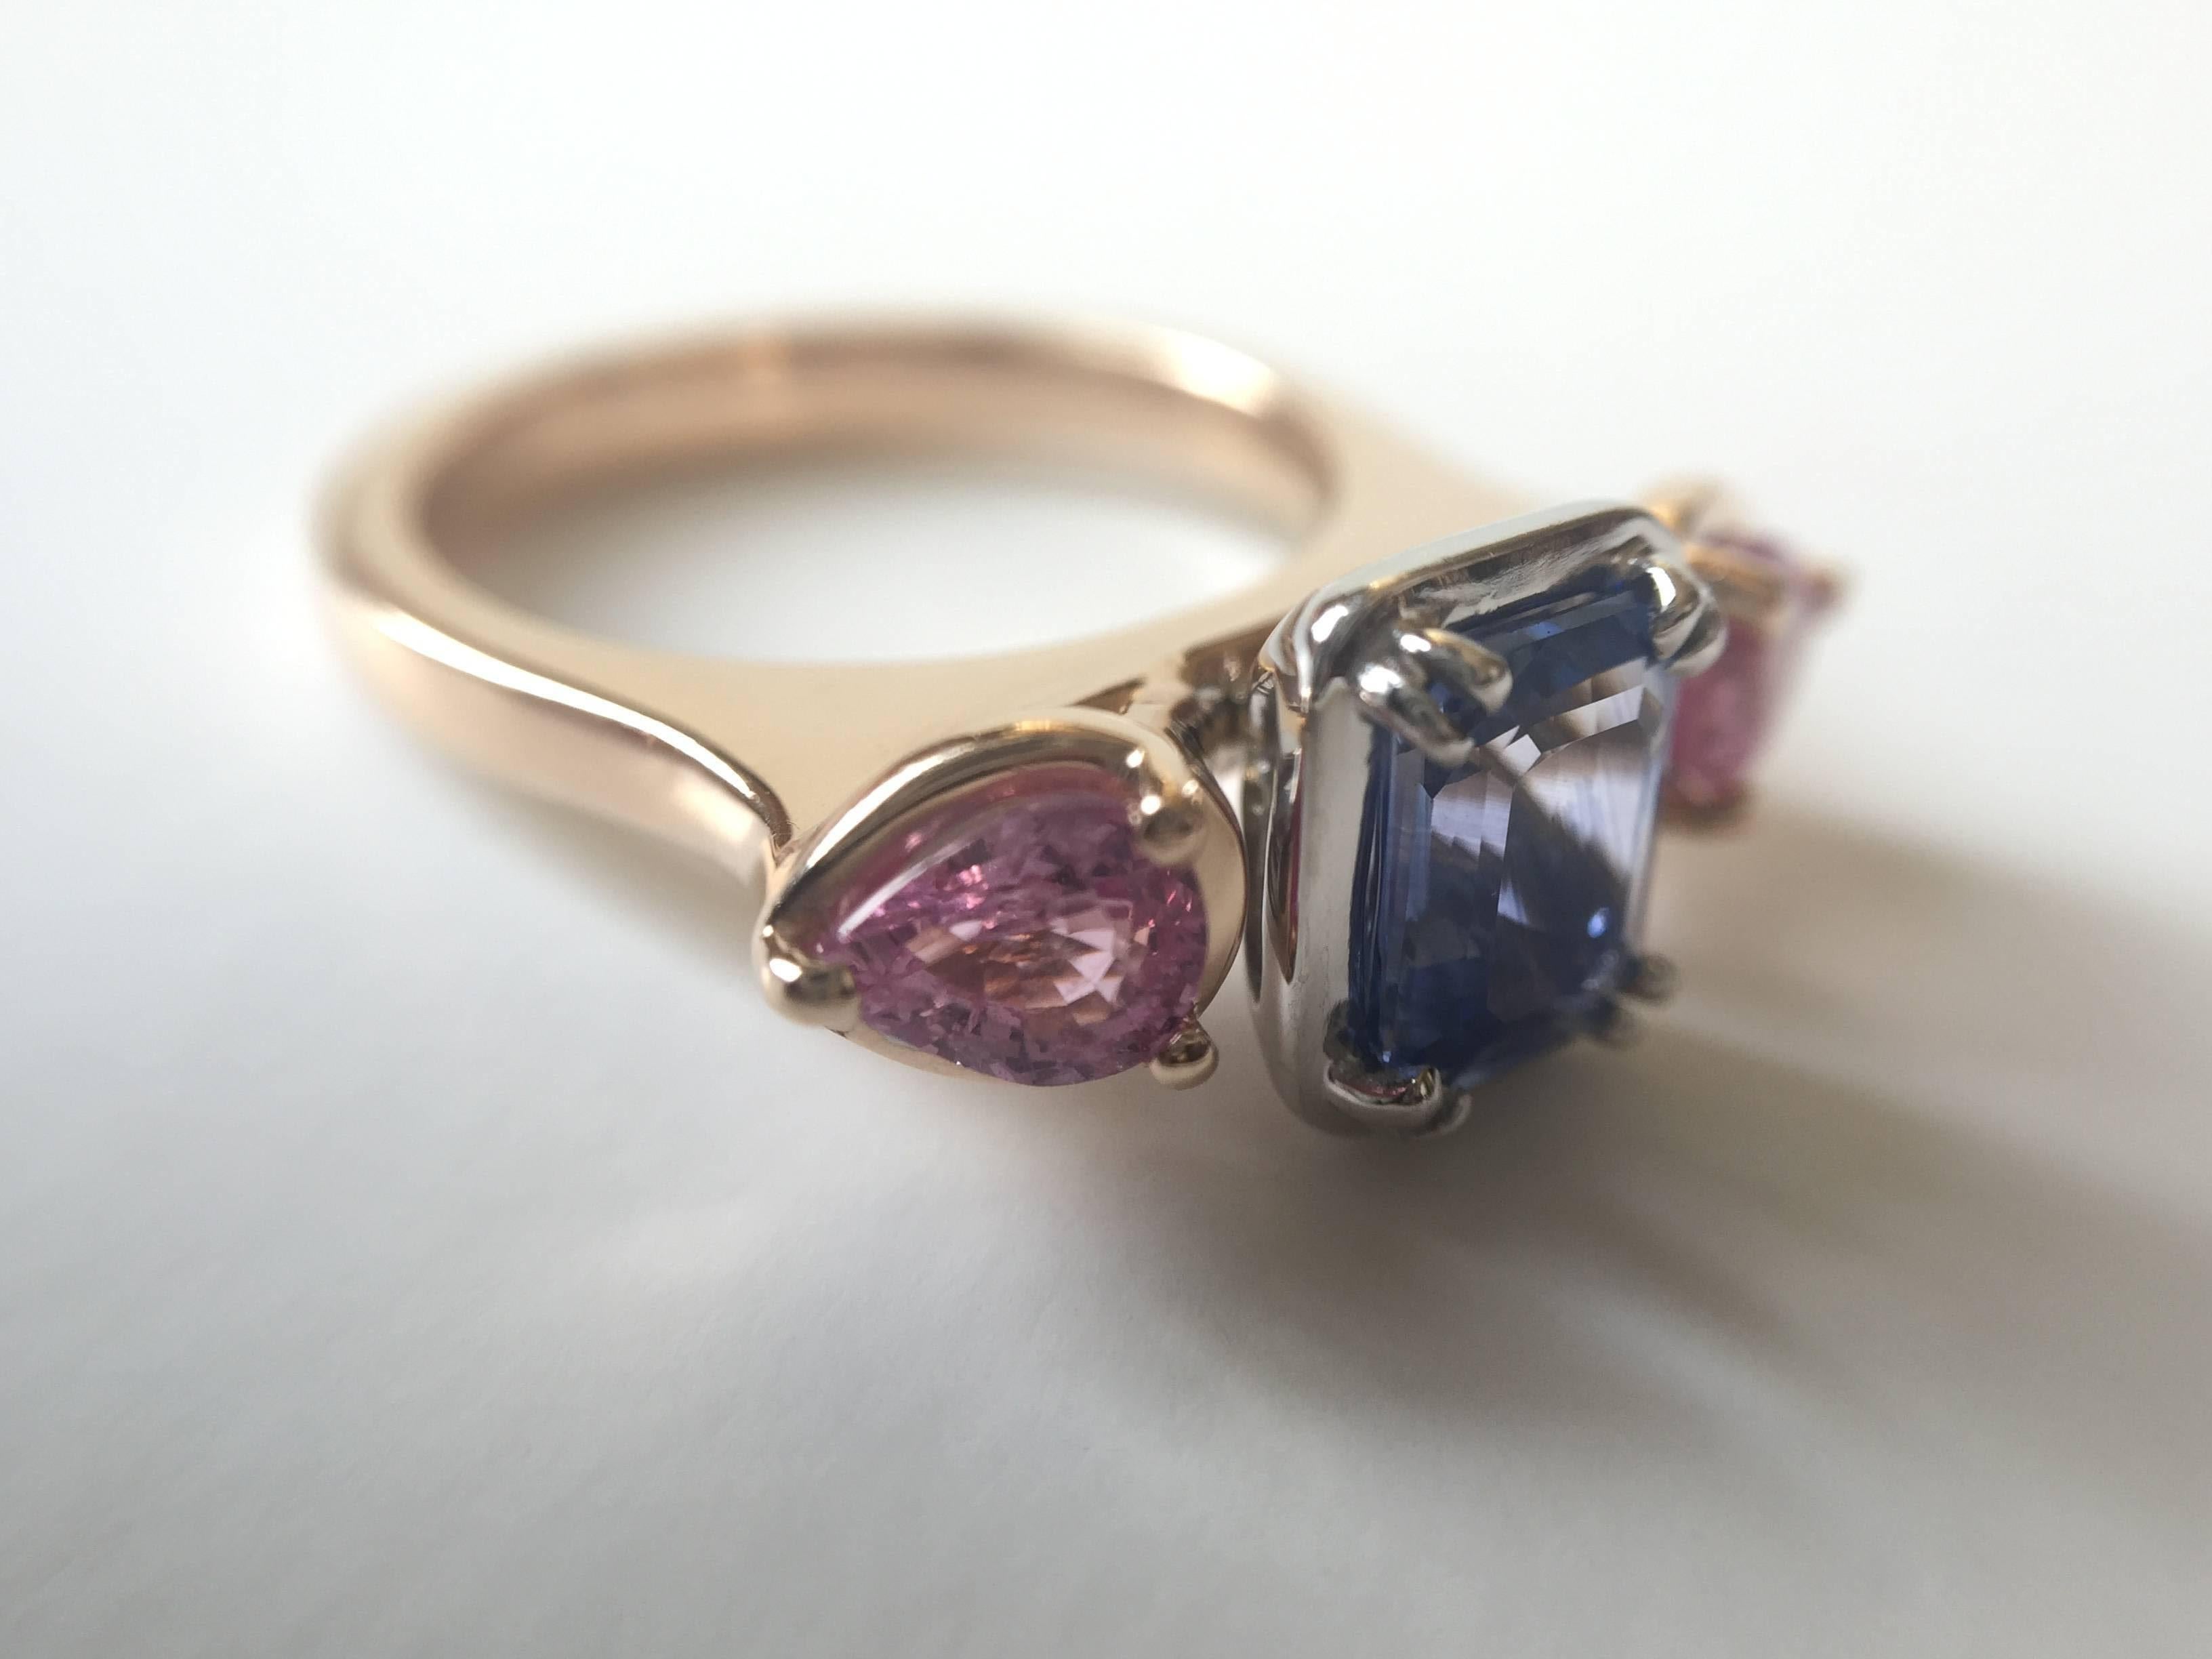 The Celebration Ring

A Faith Jewels bespoke collection ring handcrafted in 9ct rose gold featuring architectural accents of structure and geometry in bezel claw settings used on the three handpicked sapphires in blue and pink.

US Size 5.5 or UK